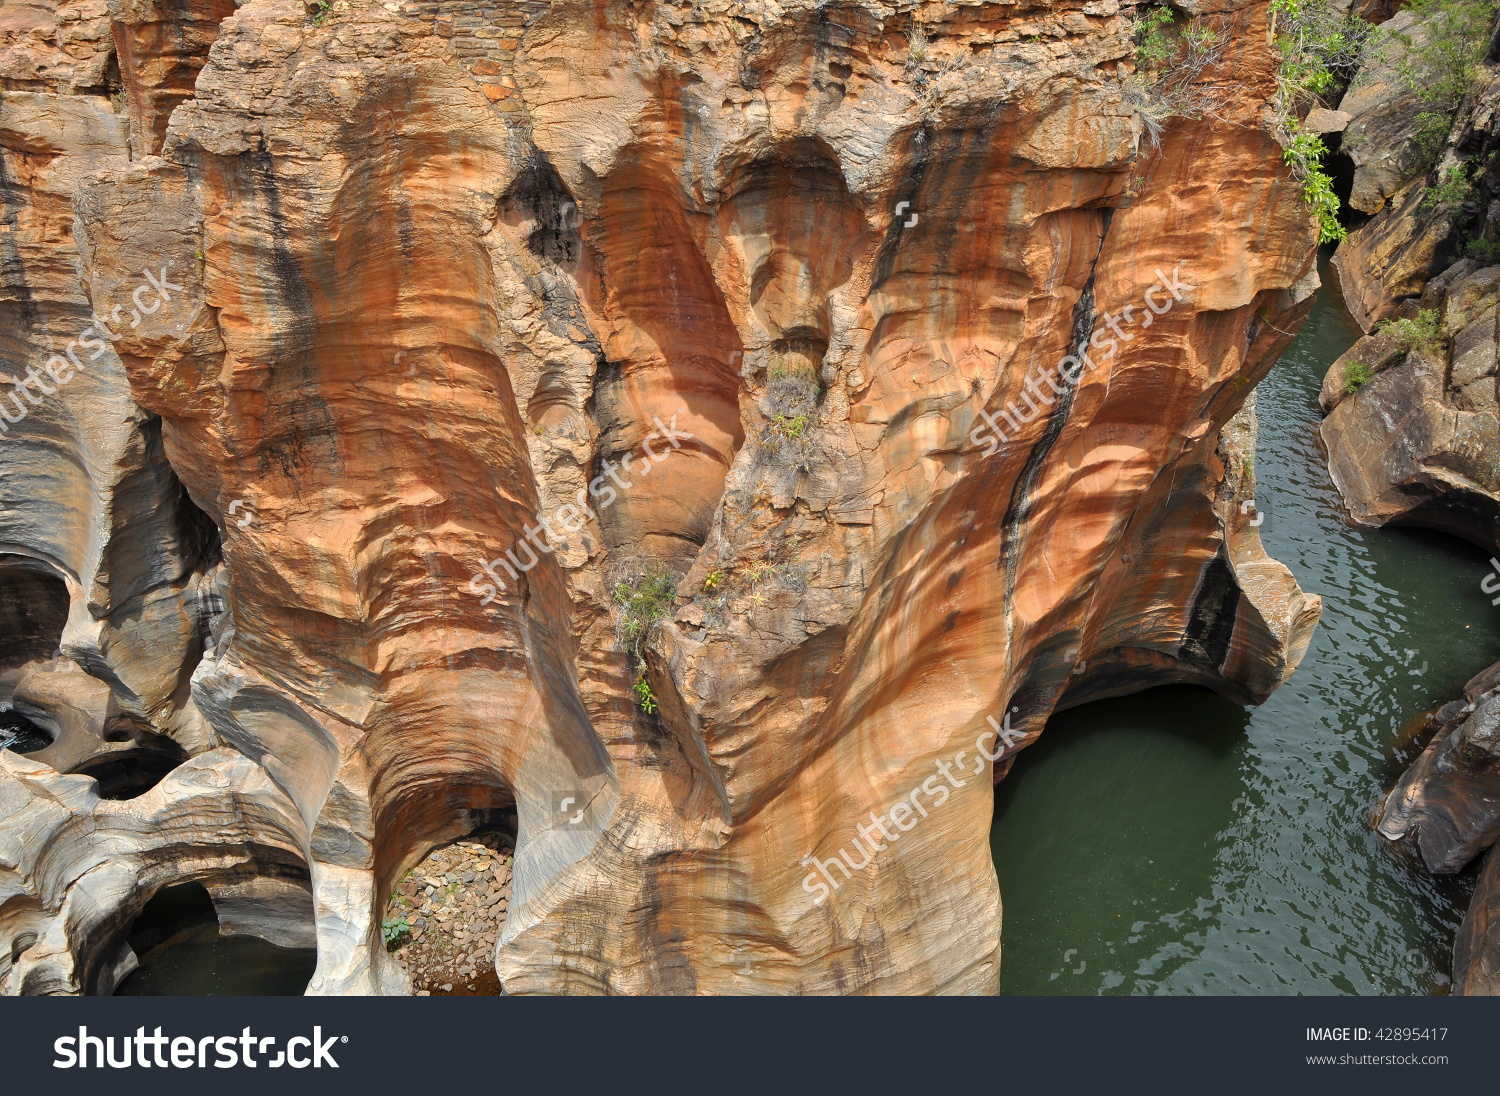 Bourke'S Luck Potholes,Blyde River Canyon,South Africa Stock Photo.